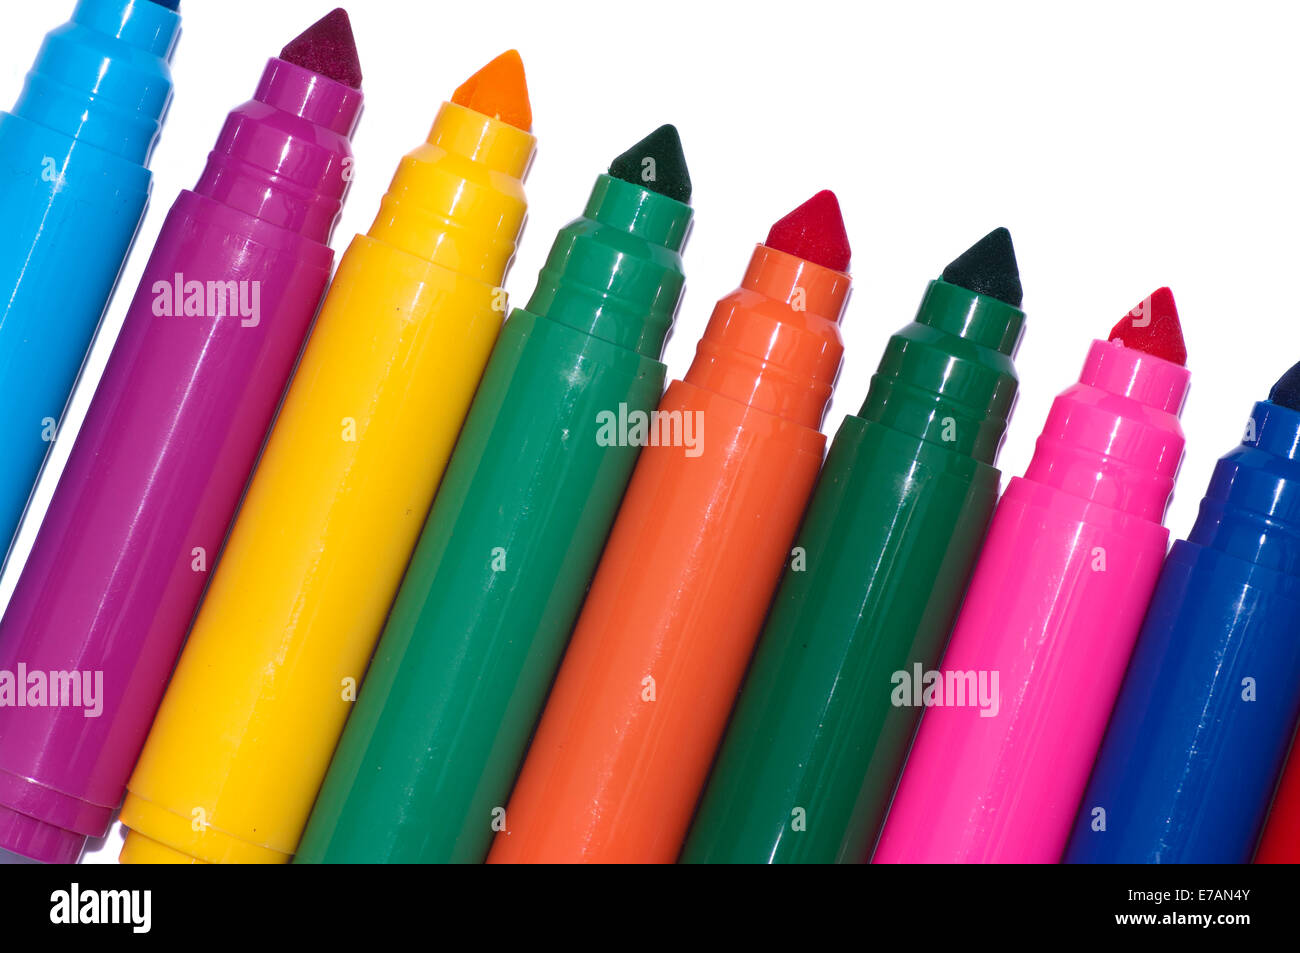 Coloured Childrens Colouring Pens Stock Photo